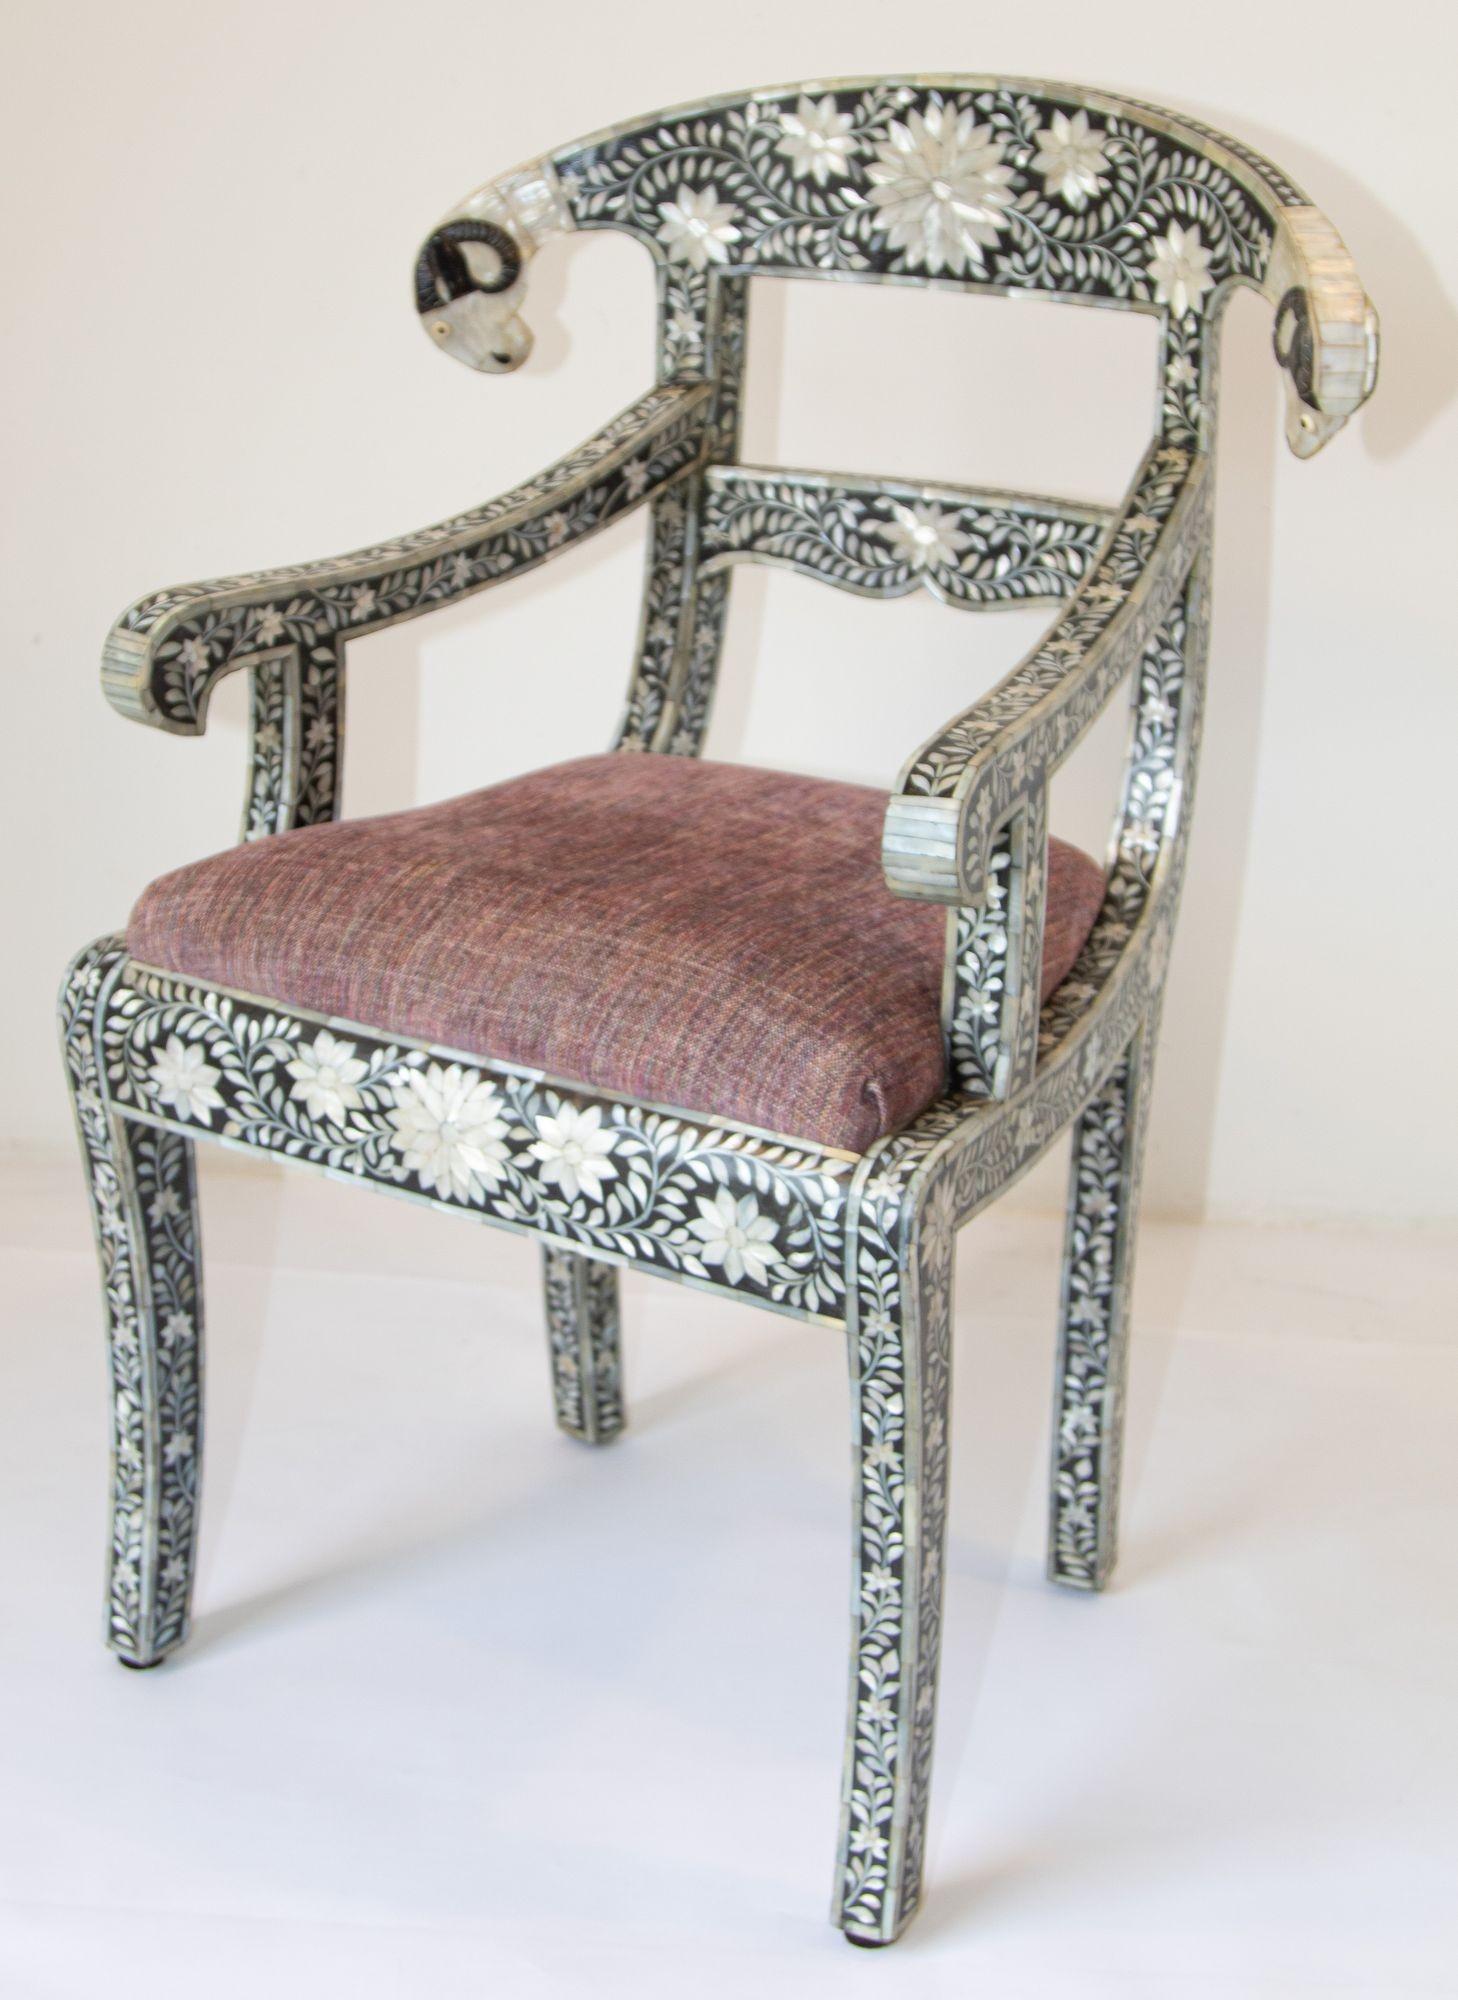 Anglo-Indian Mughal Mother of Pearl Inlaid Klismos Armchair with Ram Head 1 of 2 For Sale 10